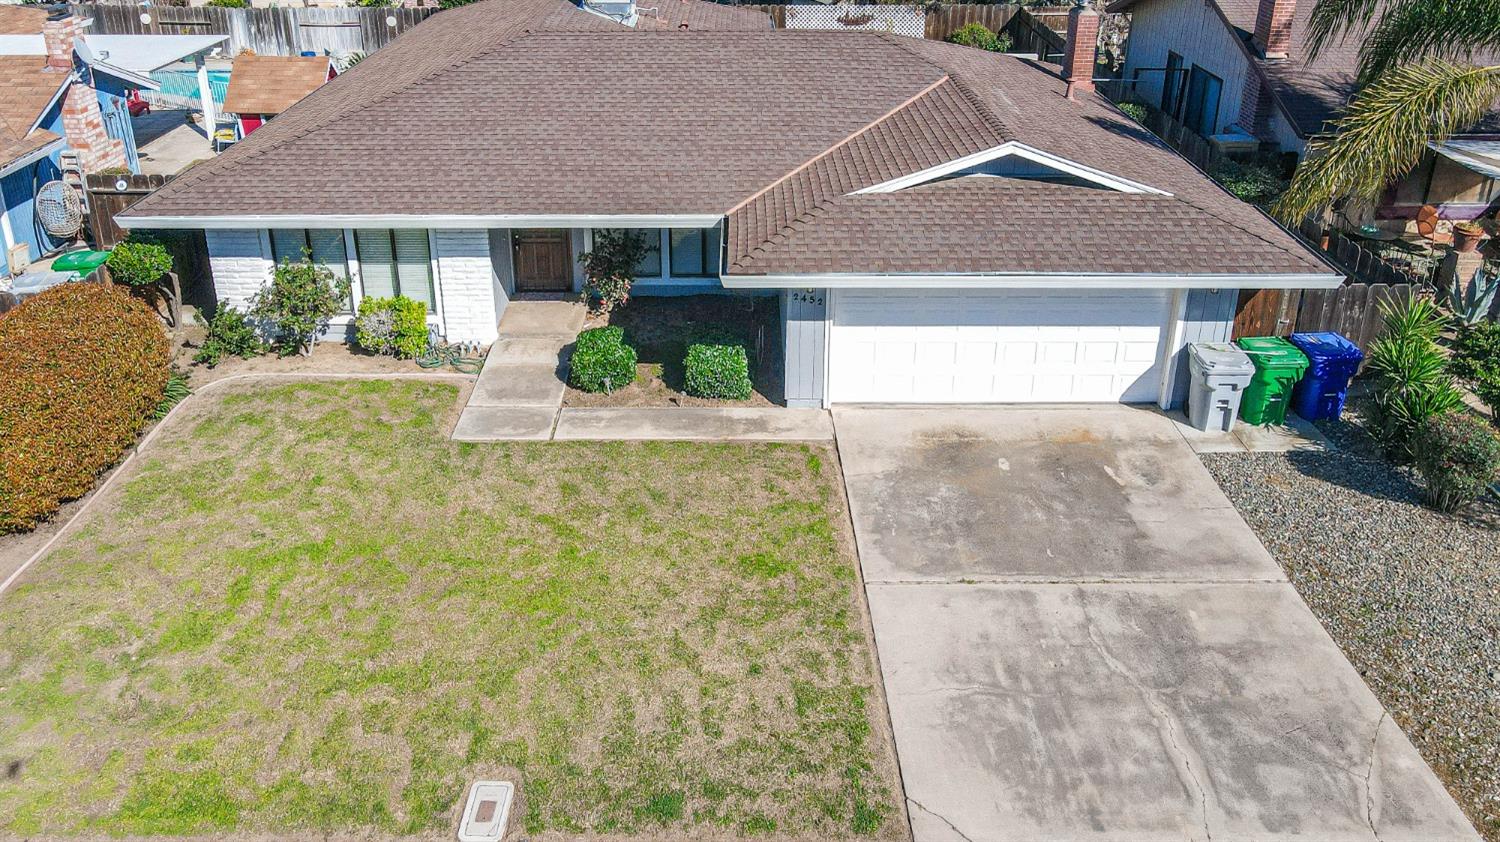 Photo of 2452 Briarwood St in Atwater, CA